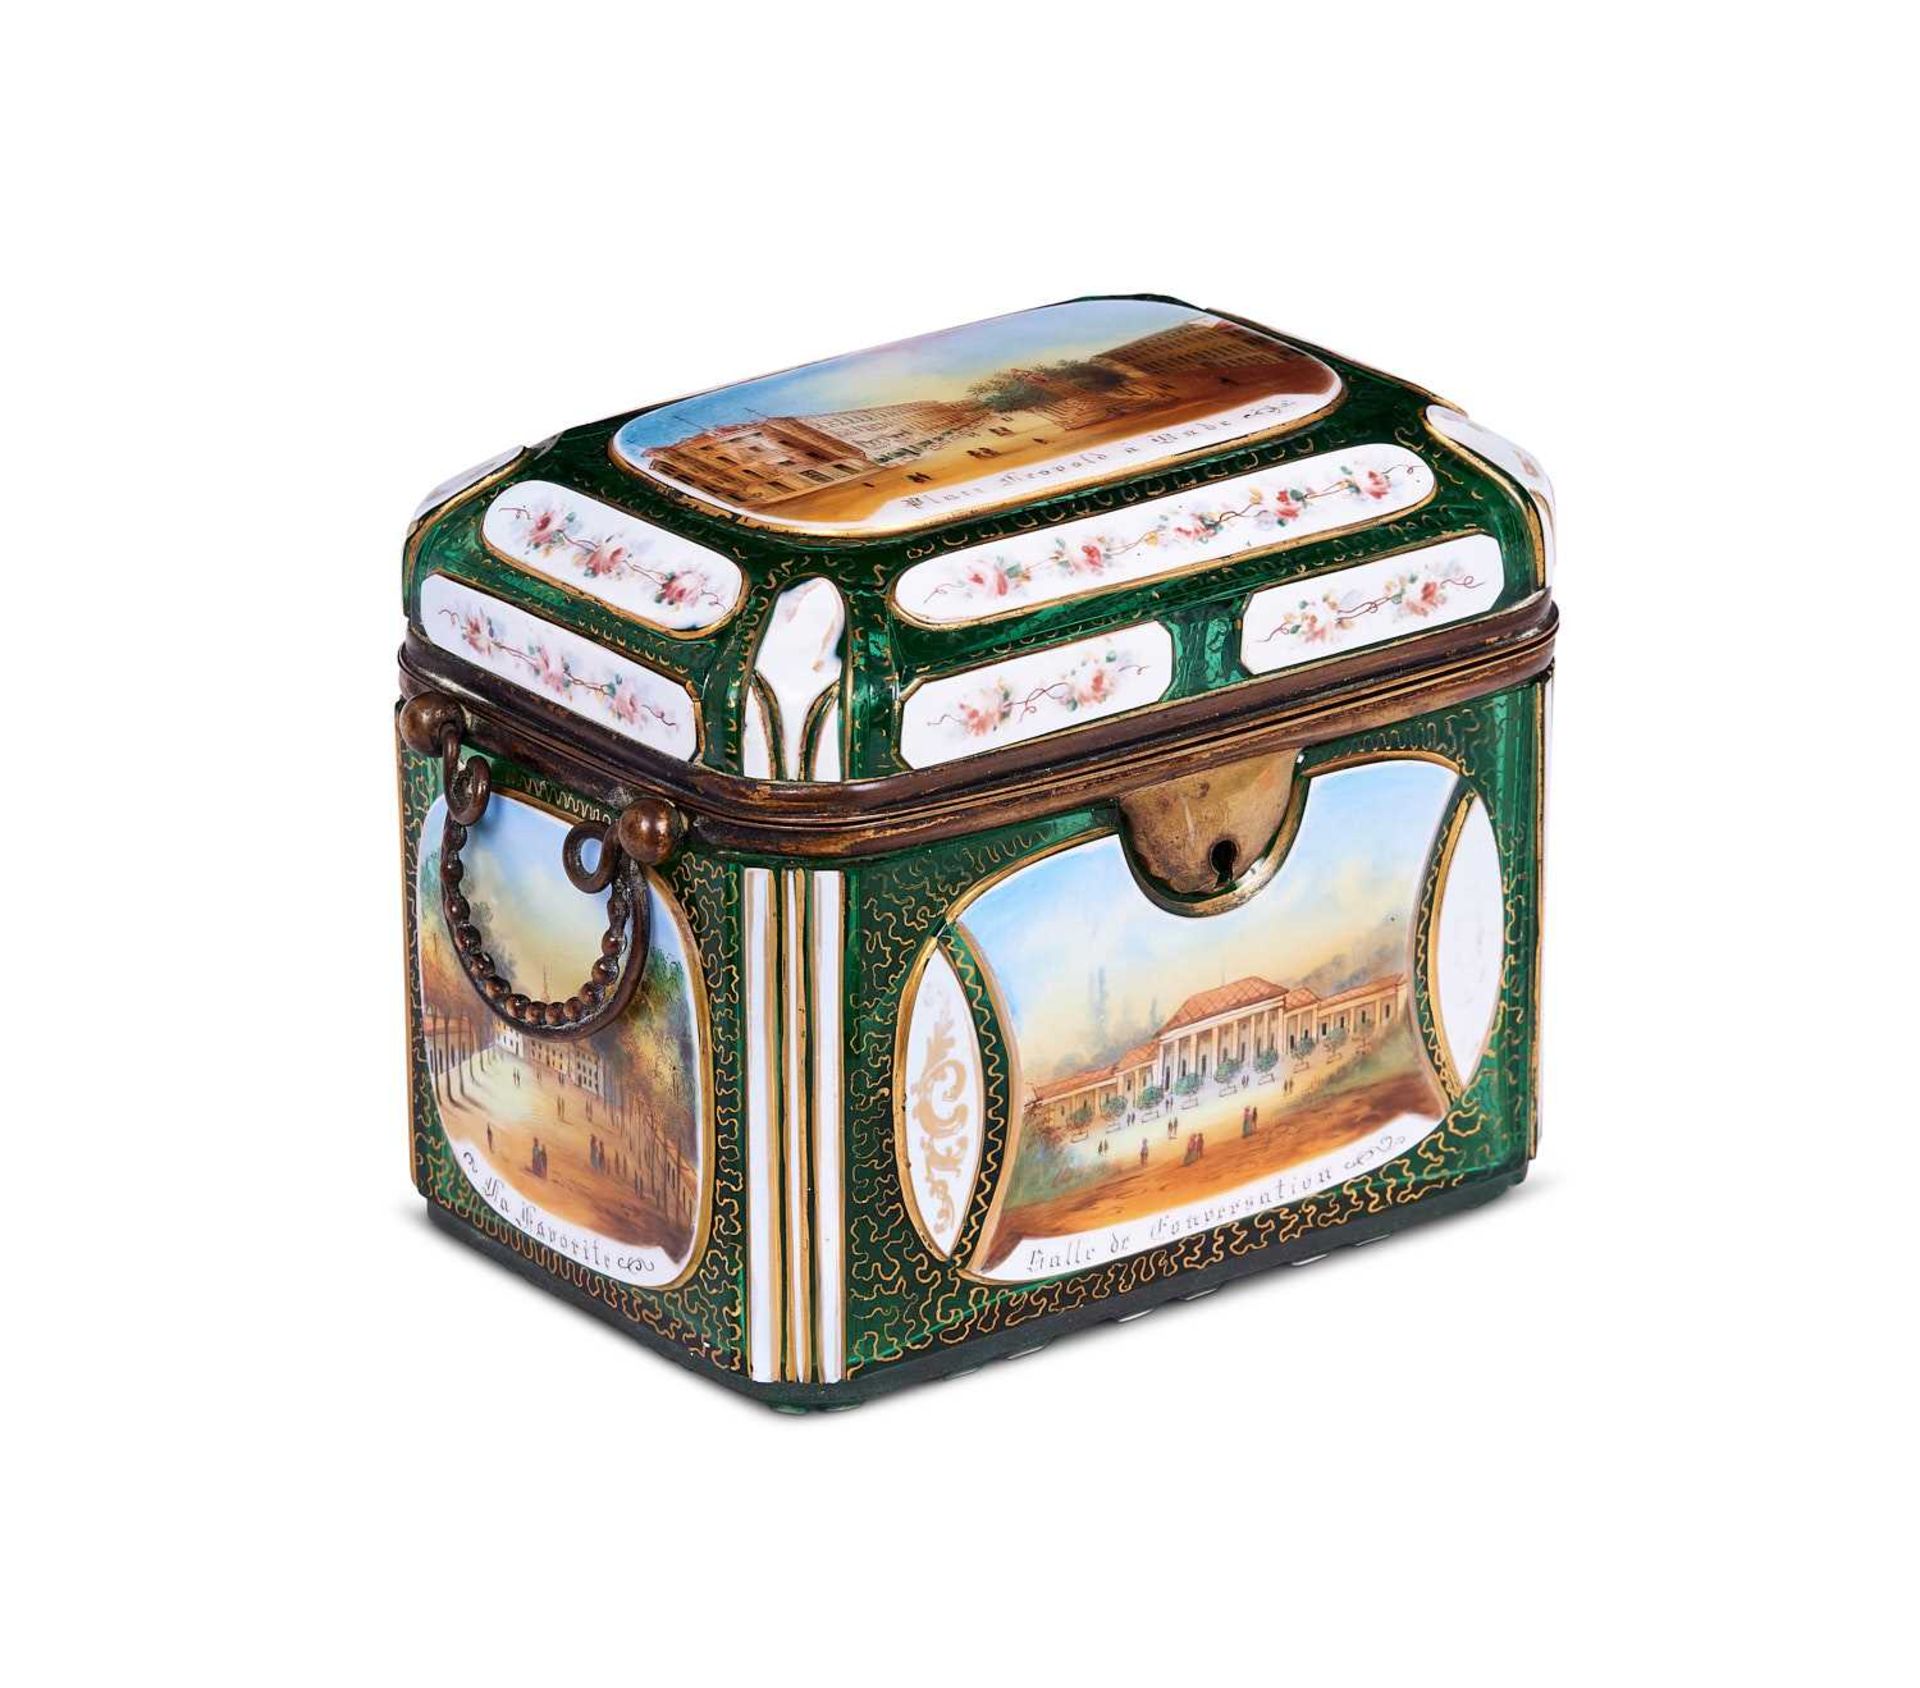 A FINE 19TH CENTURY BOHEMIAN OVERLAY GLASS CASKET PAINTED WITH SCENES OF BADEN-BADEN